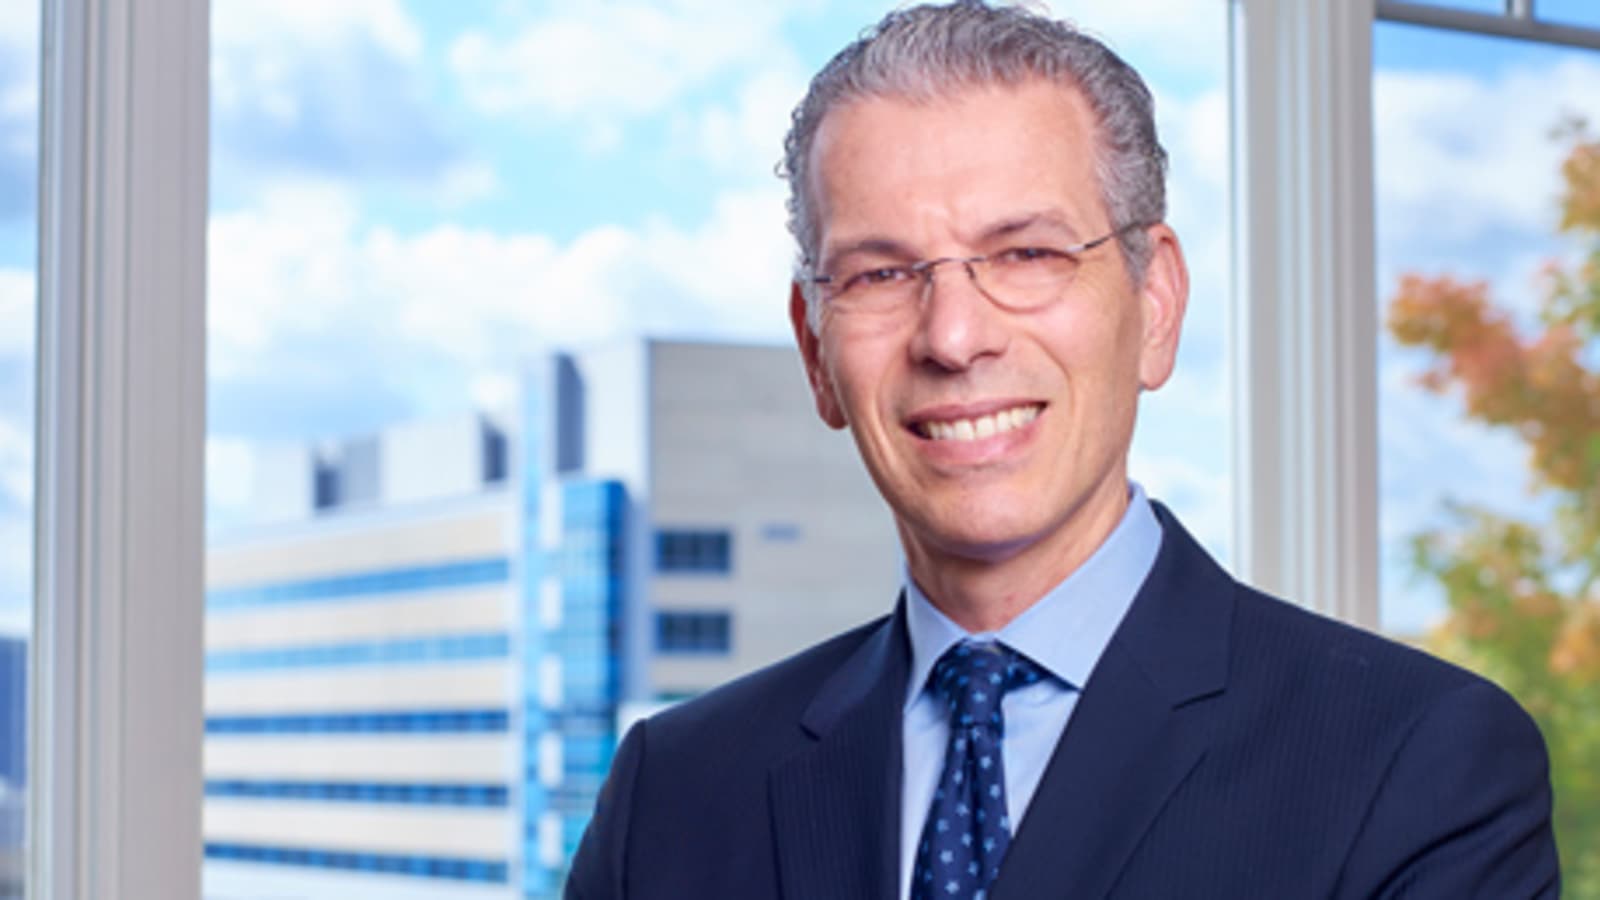 Google Health Division Chief David Feinberg Leaves To Join Health Tech Company Cerner, Projects To Continue